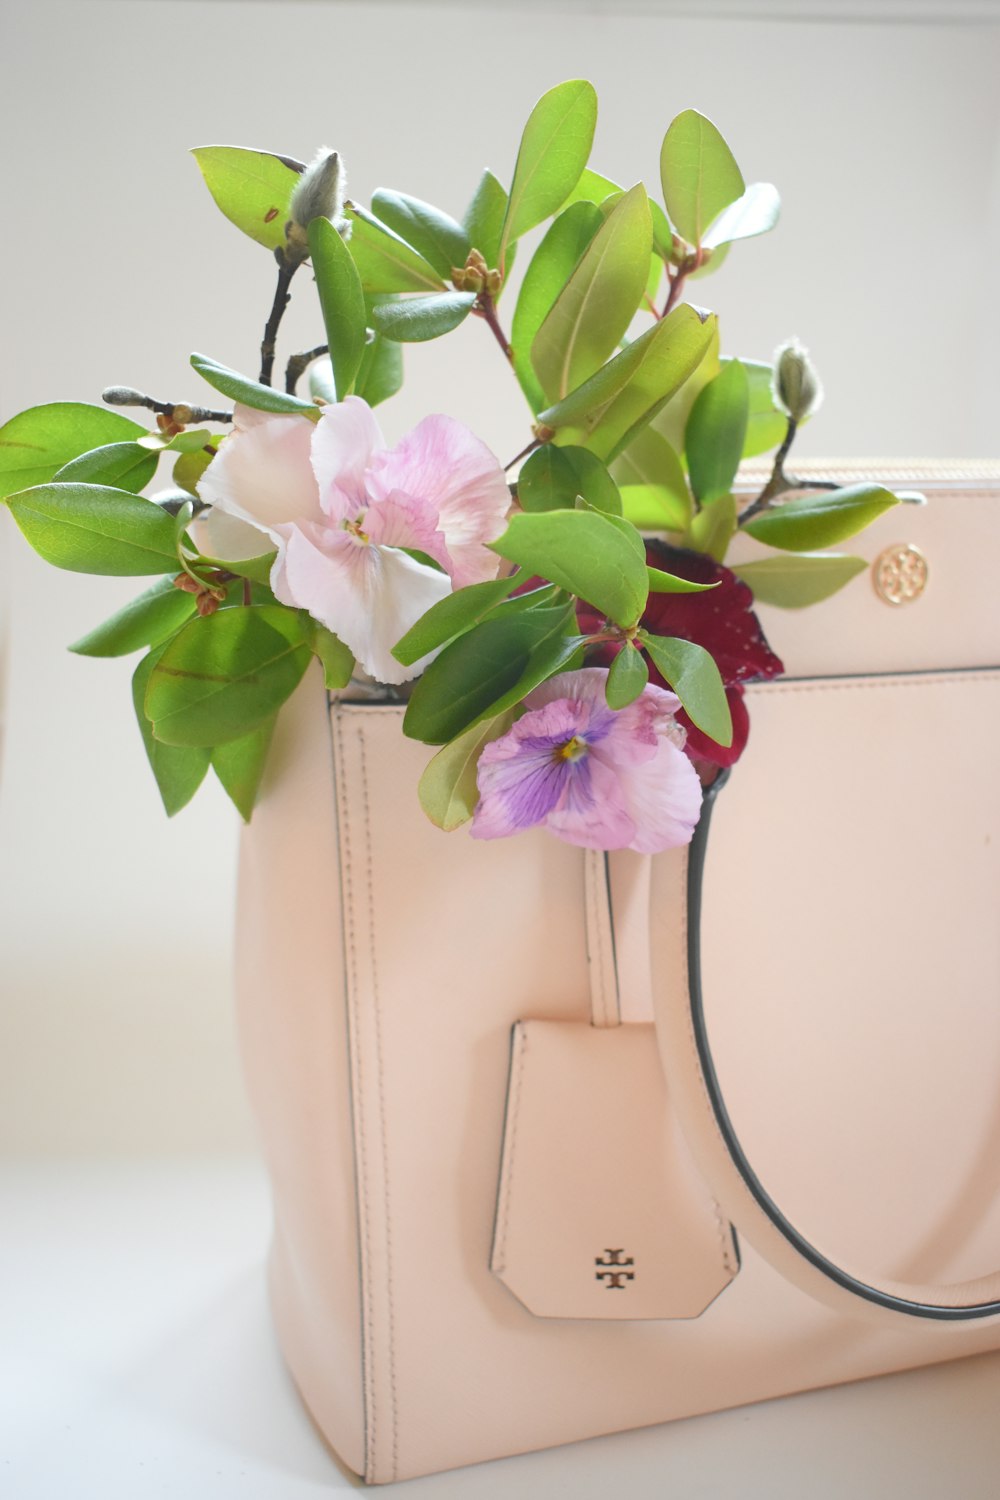 pink and white flowers on white leather handbag